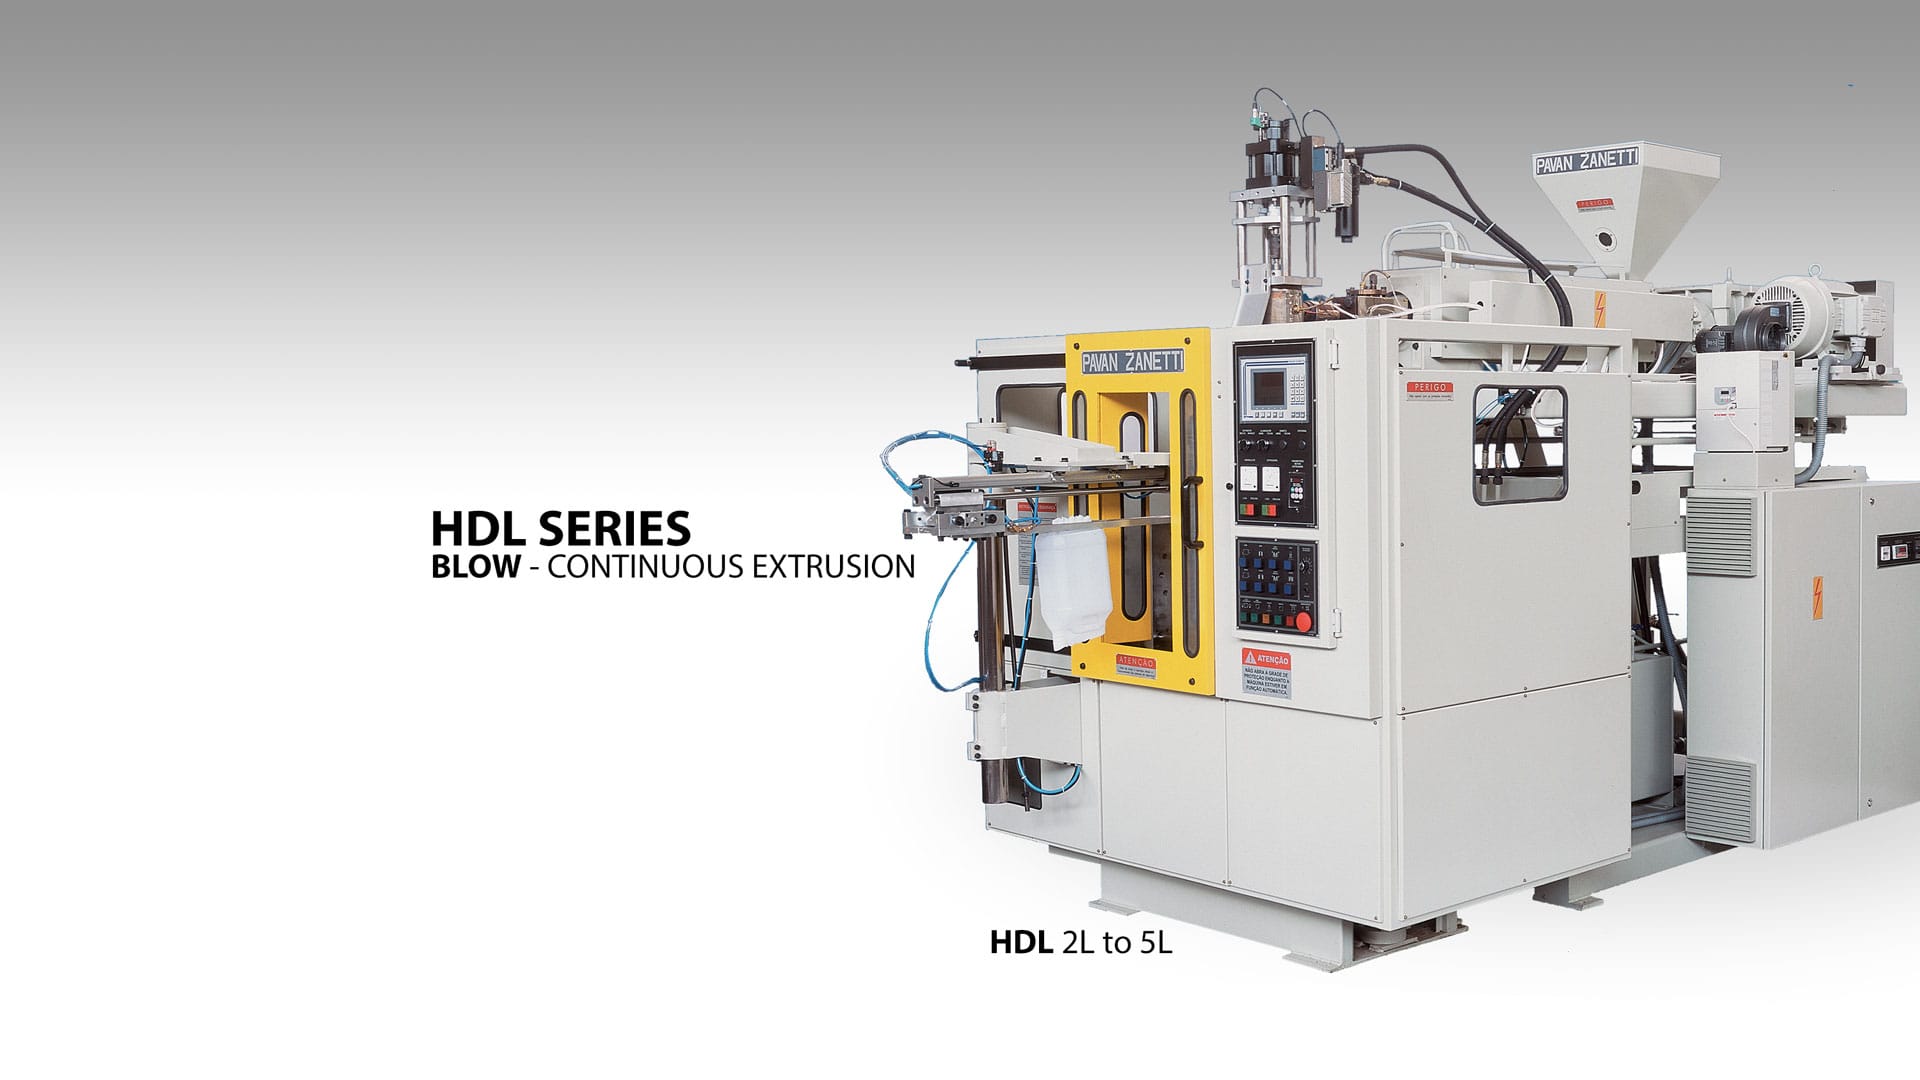 HDL Series Blow Continuous Extrusion